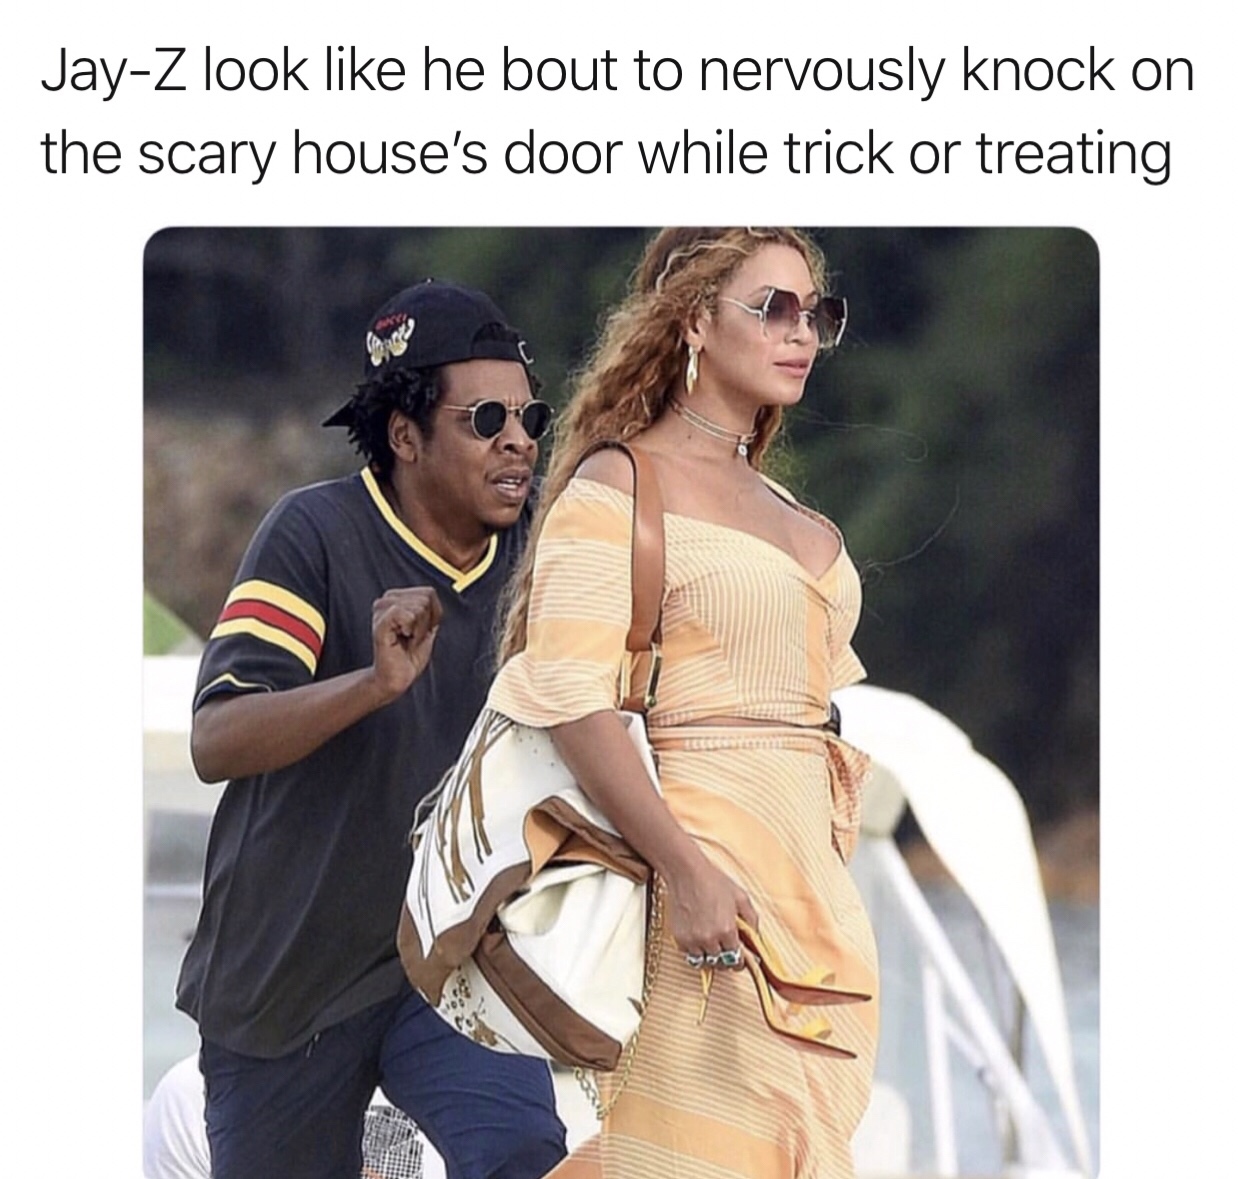 memes - beyonce jay z meme - JayZ look he bout to nervously knock on the scary house's door while trick or treating